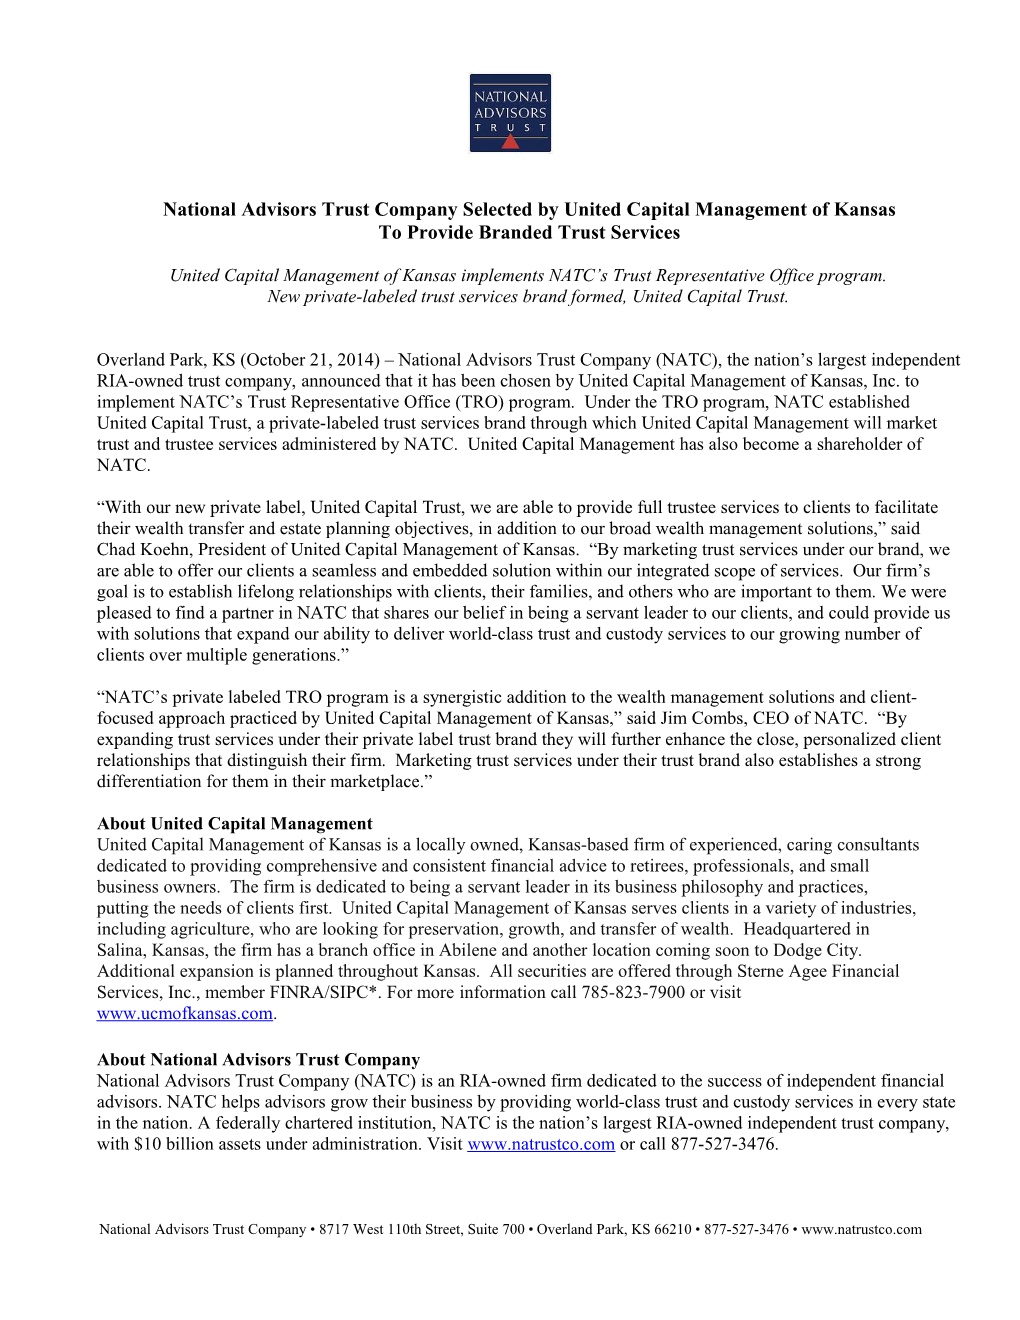 National Advisors Trust Company Selected by United Capital Management of Kansas